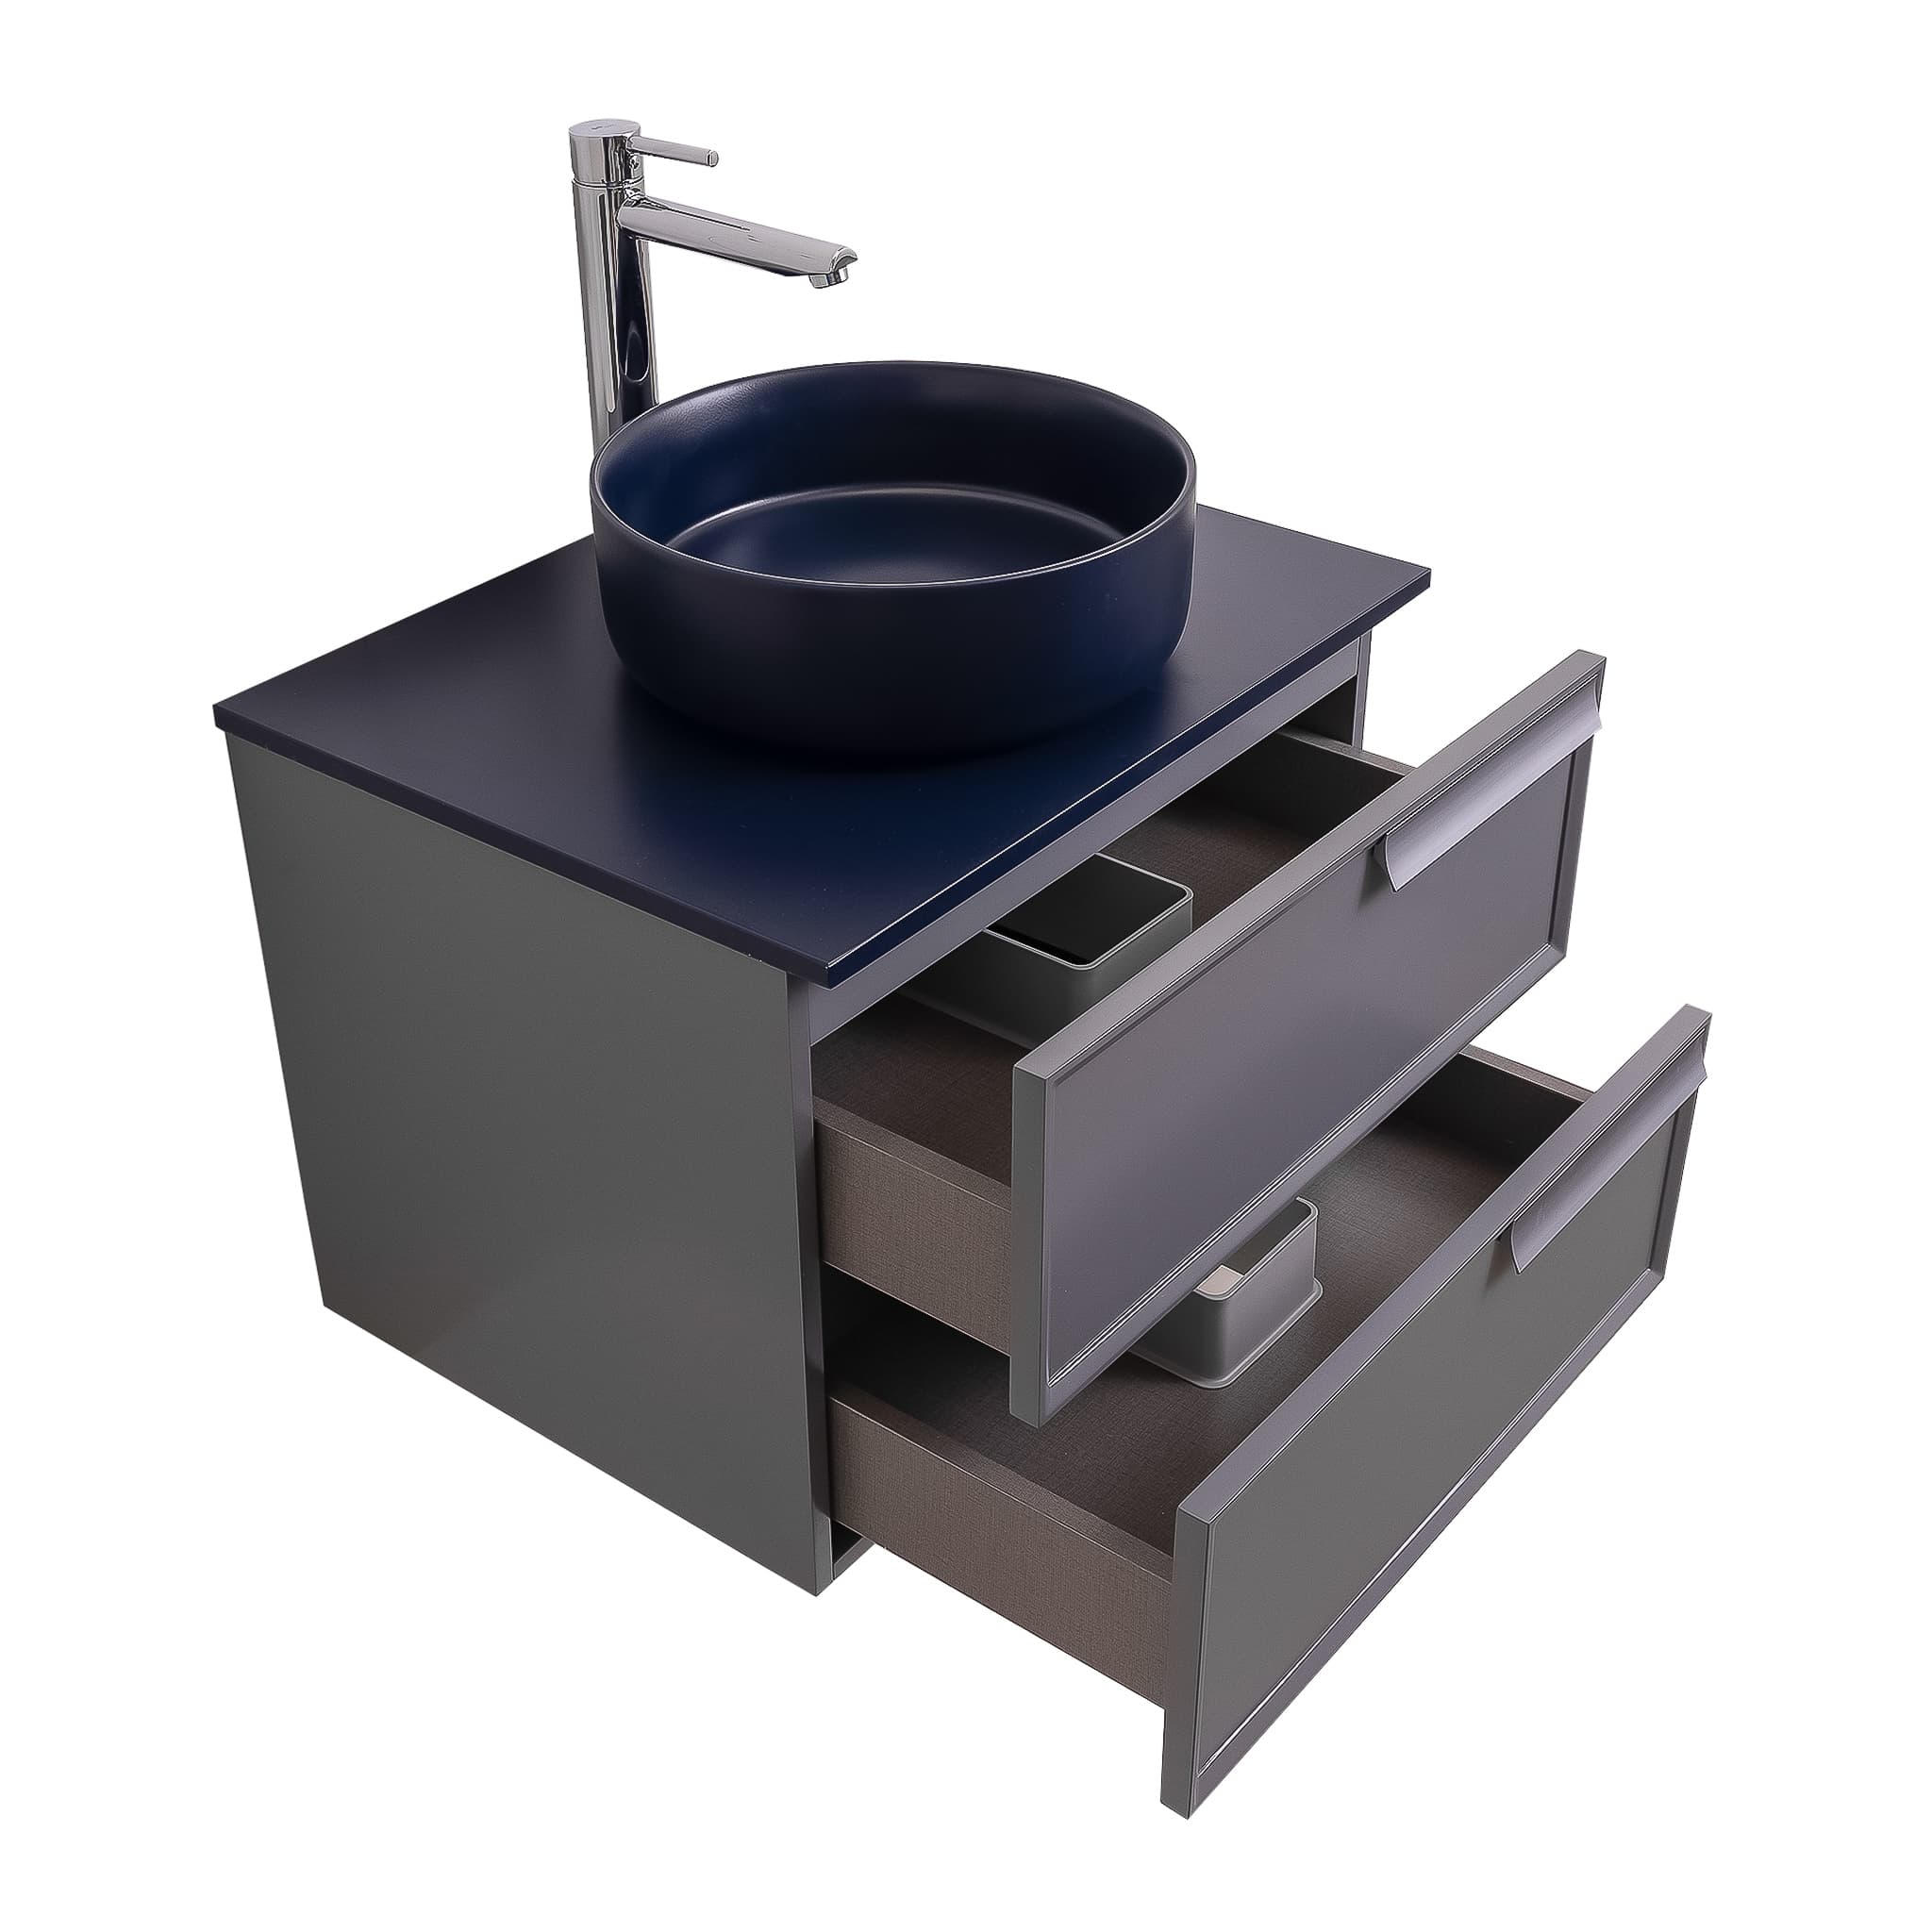 Garda 23.5 Matte Grey Cabinet, Ares Navy Blue Top and Ares Navy Blue Ceramic Basin, Wall Mounted Modern Vanity Set